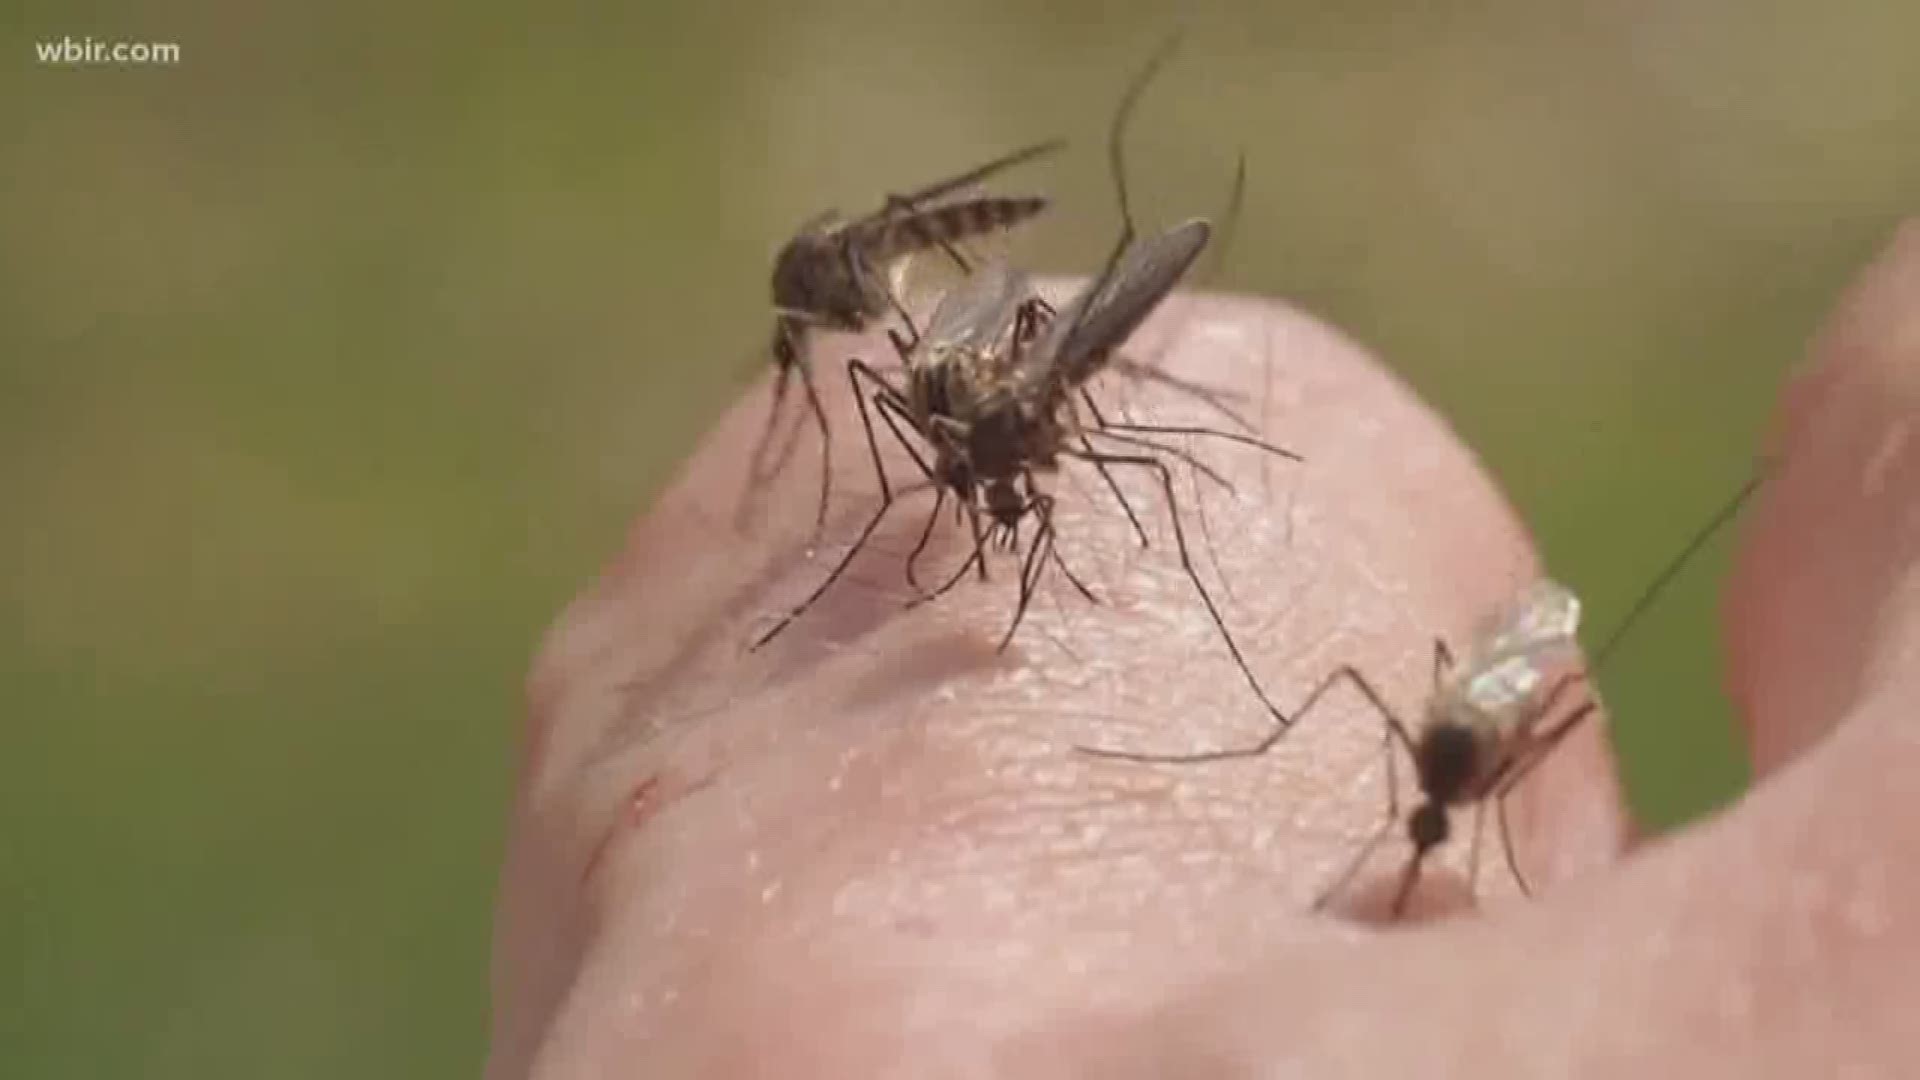 With standing water still hanging around after last week's heavy rain, experts say this could mean more mosquitoes.